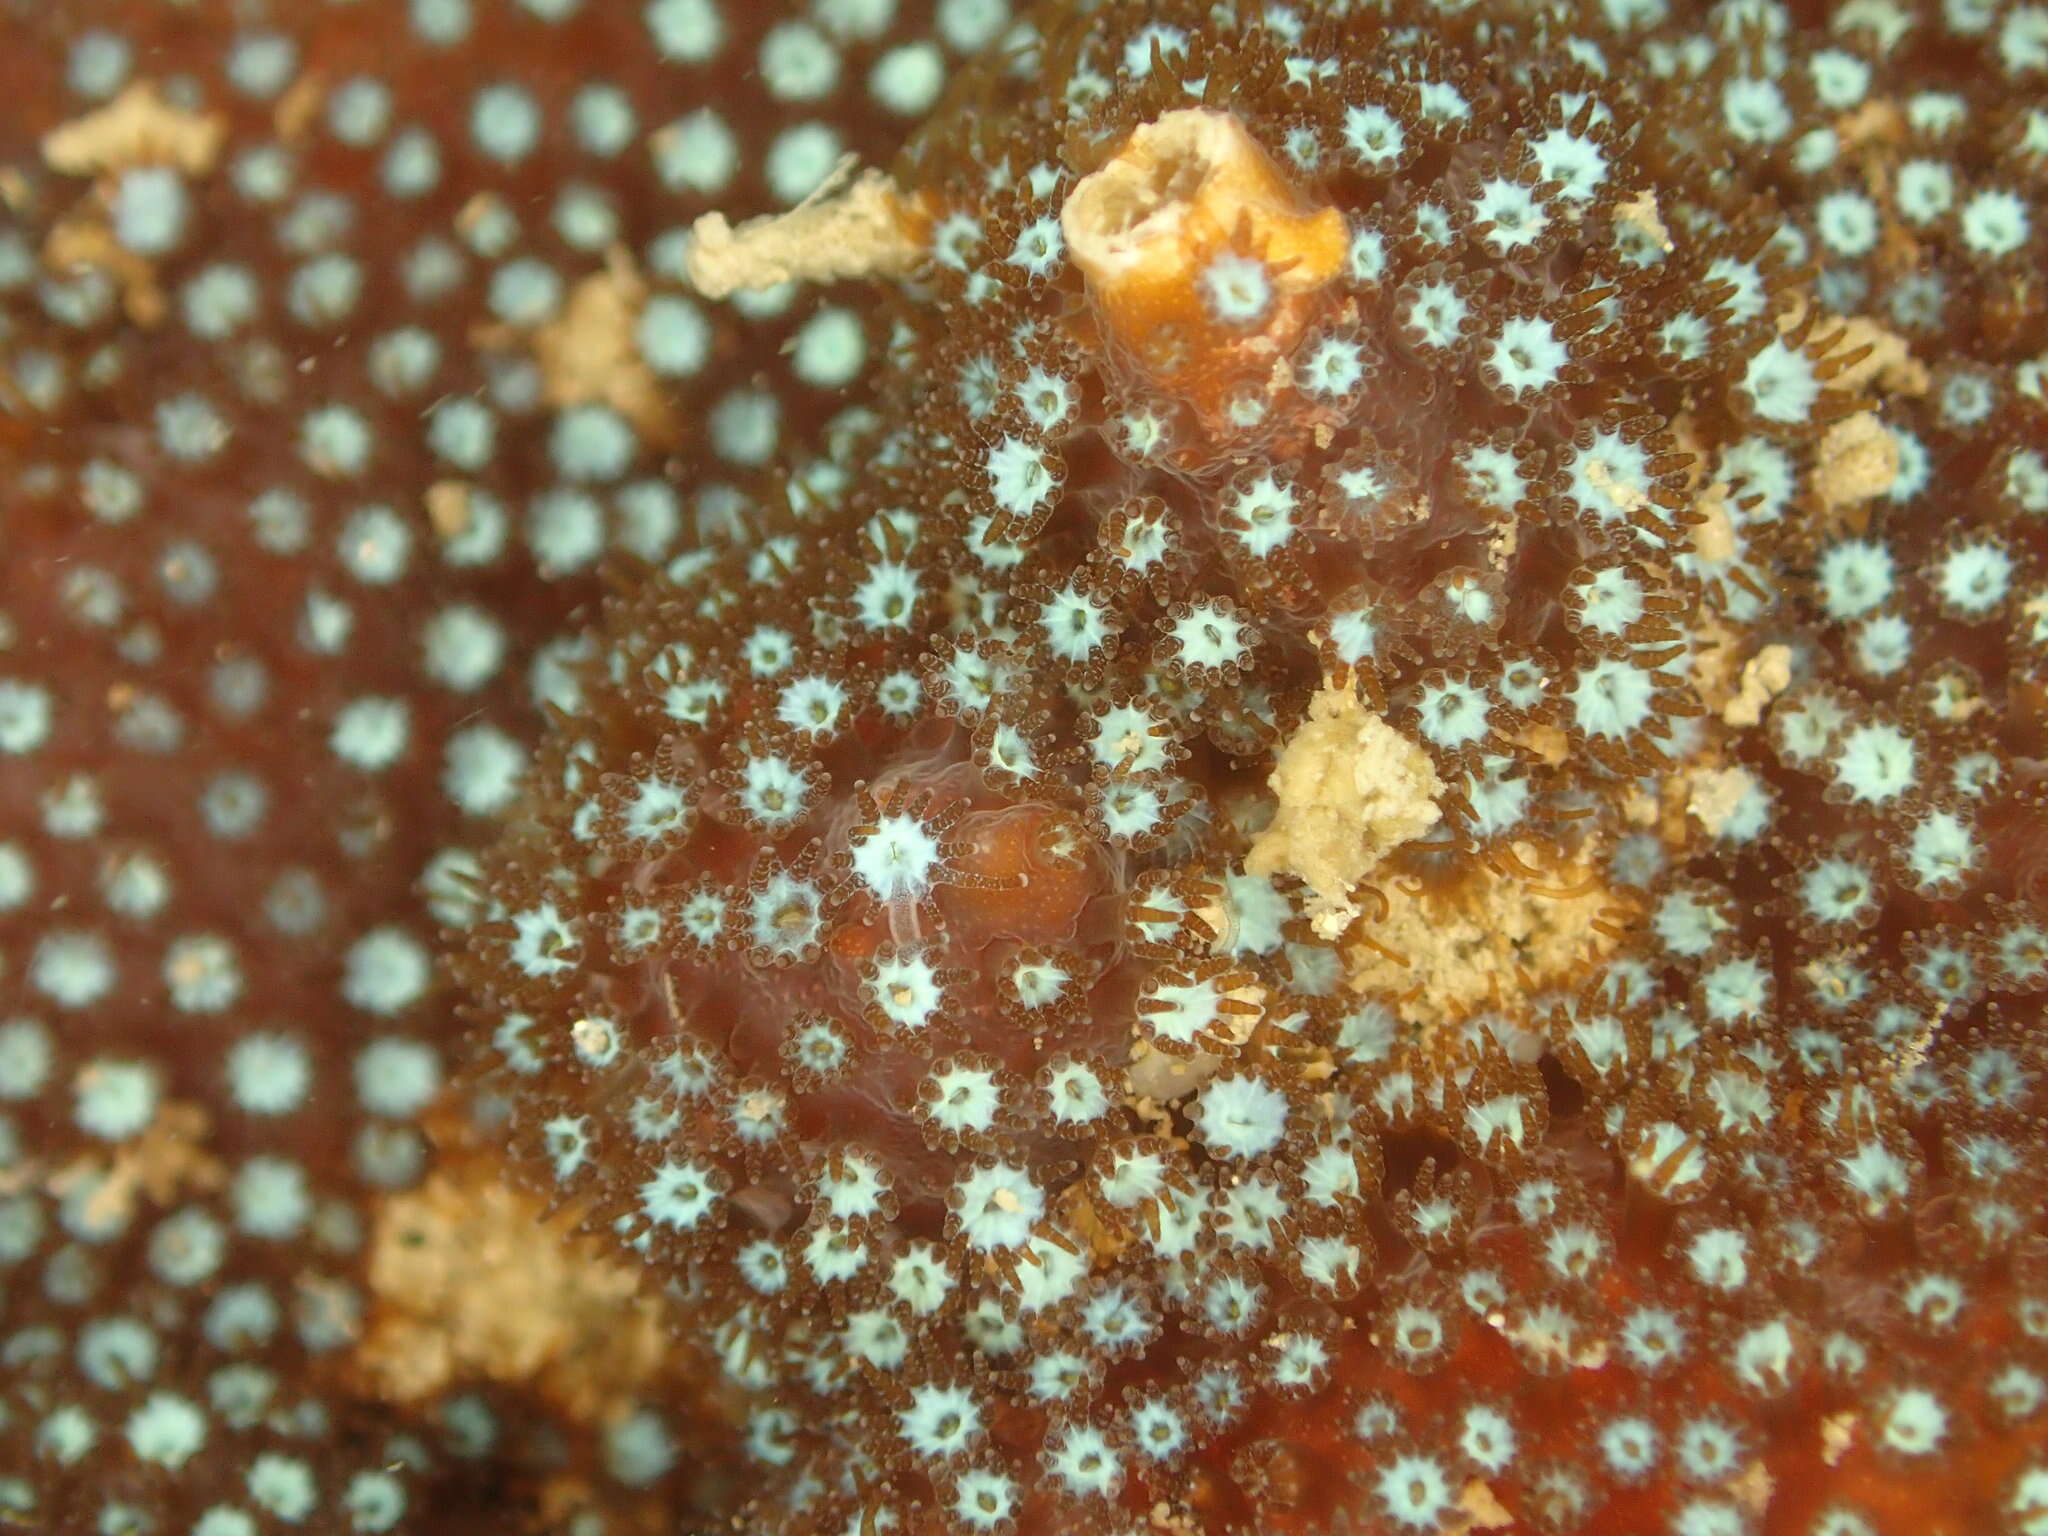 Image of Thorn Coral